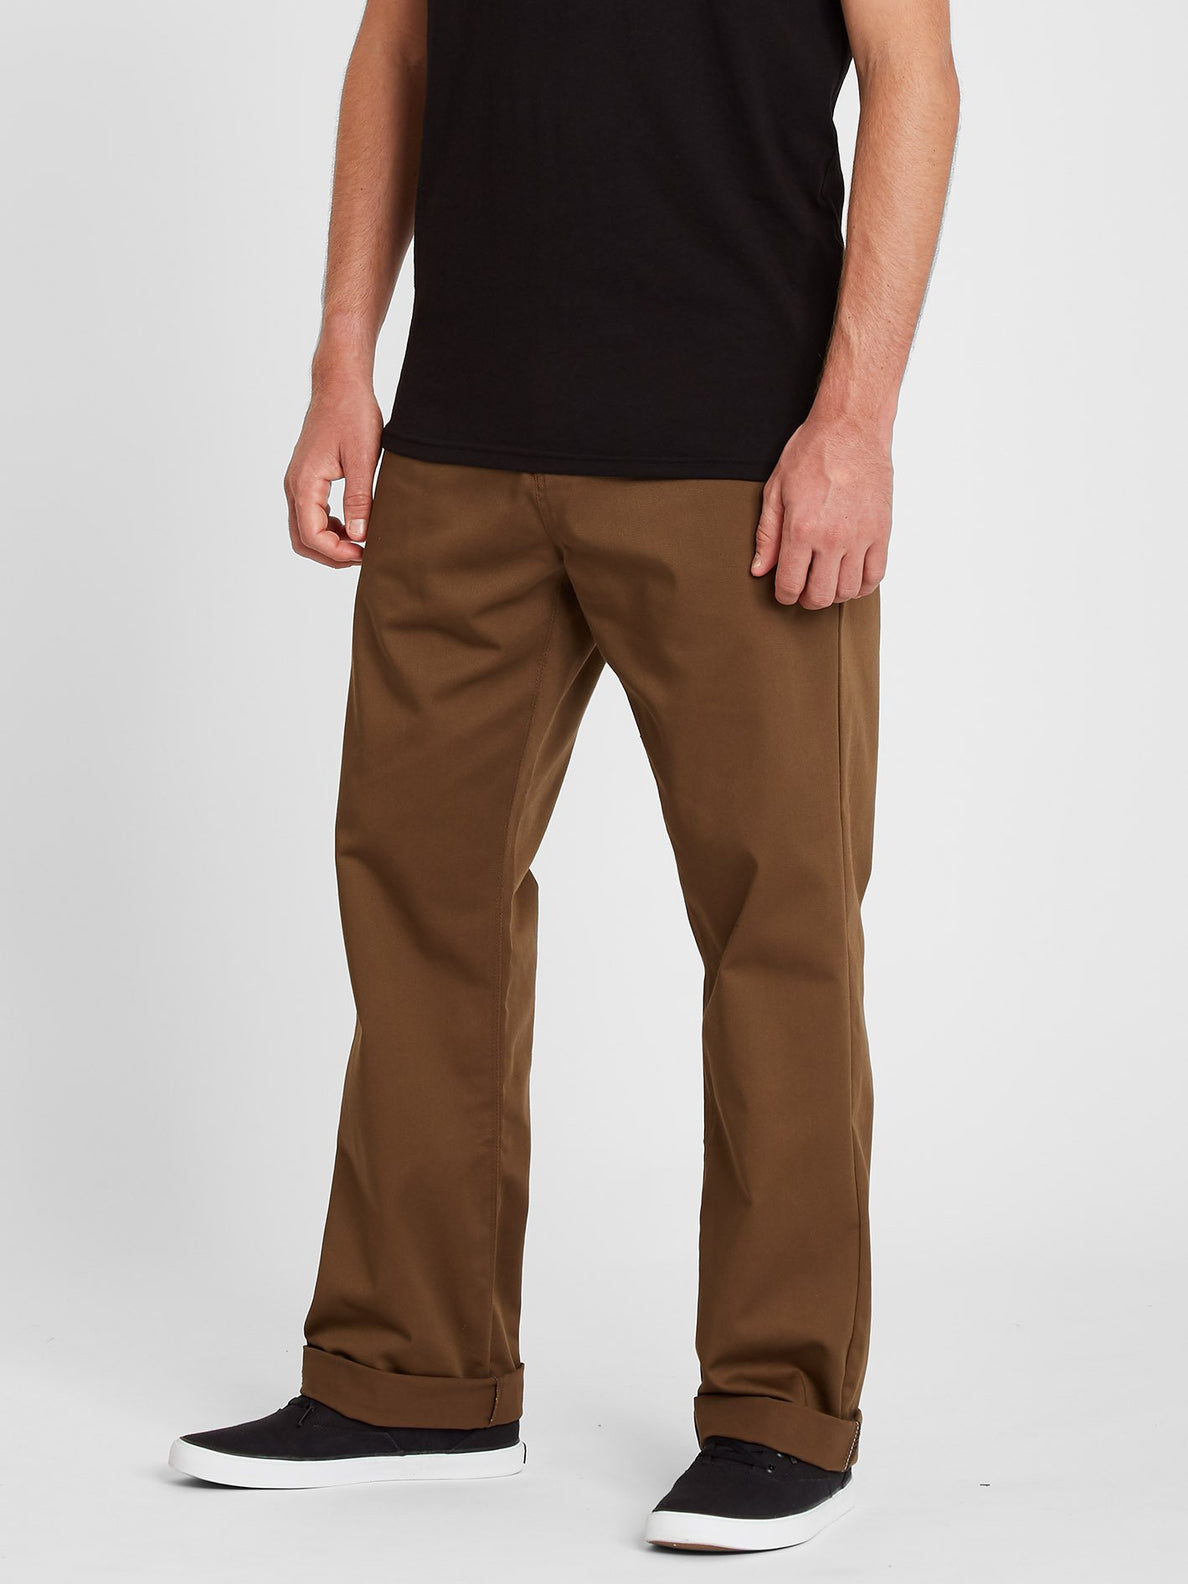 Substance Chino Pant - Vintage Brown (A1112104_VBN) [F]